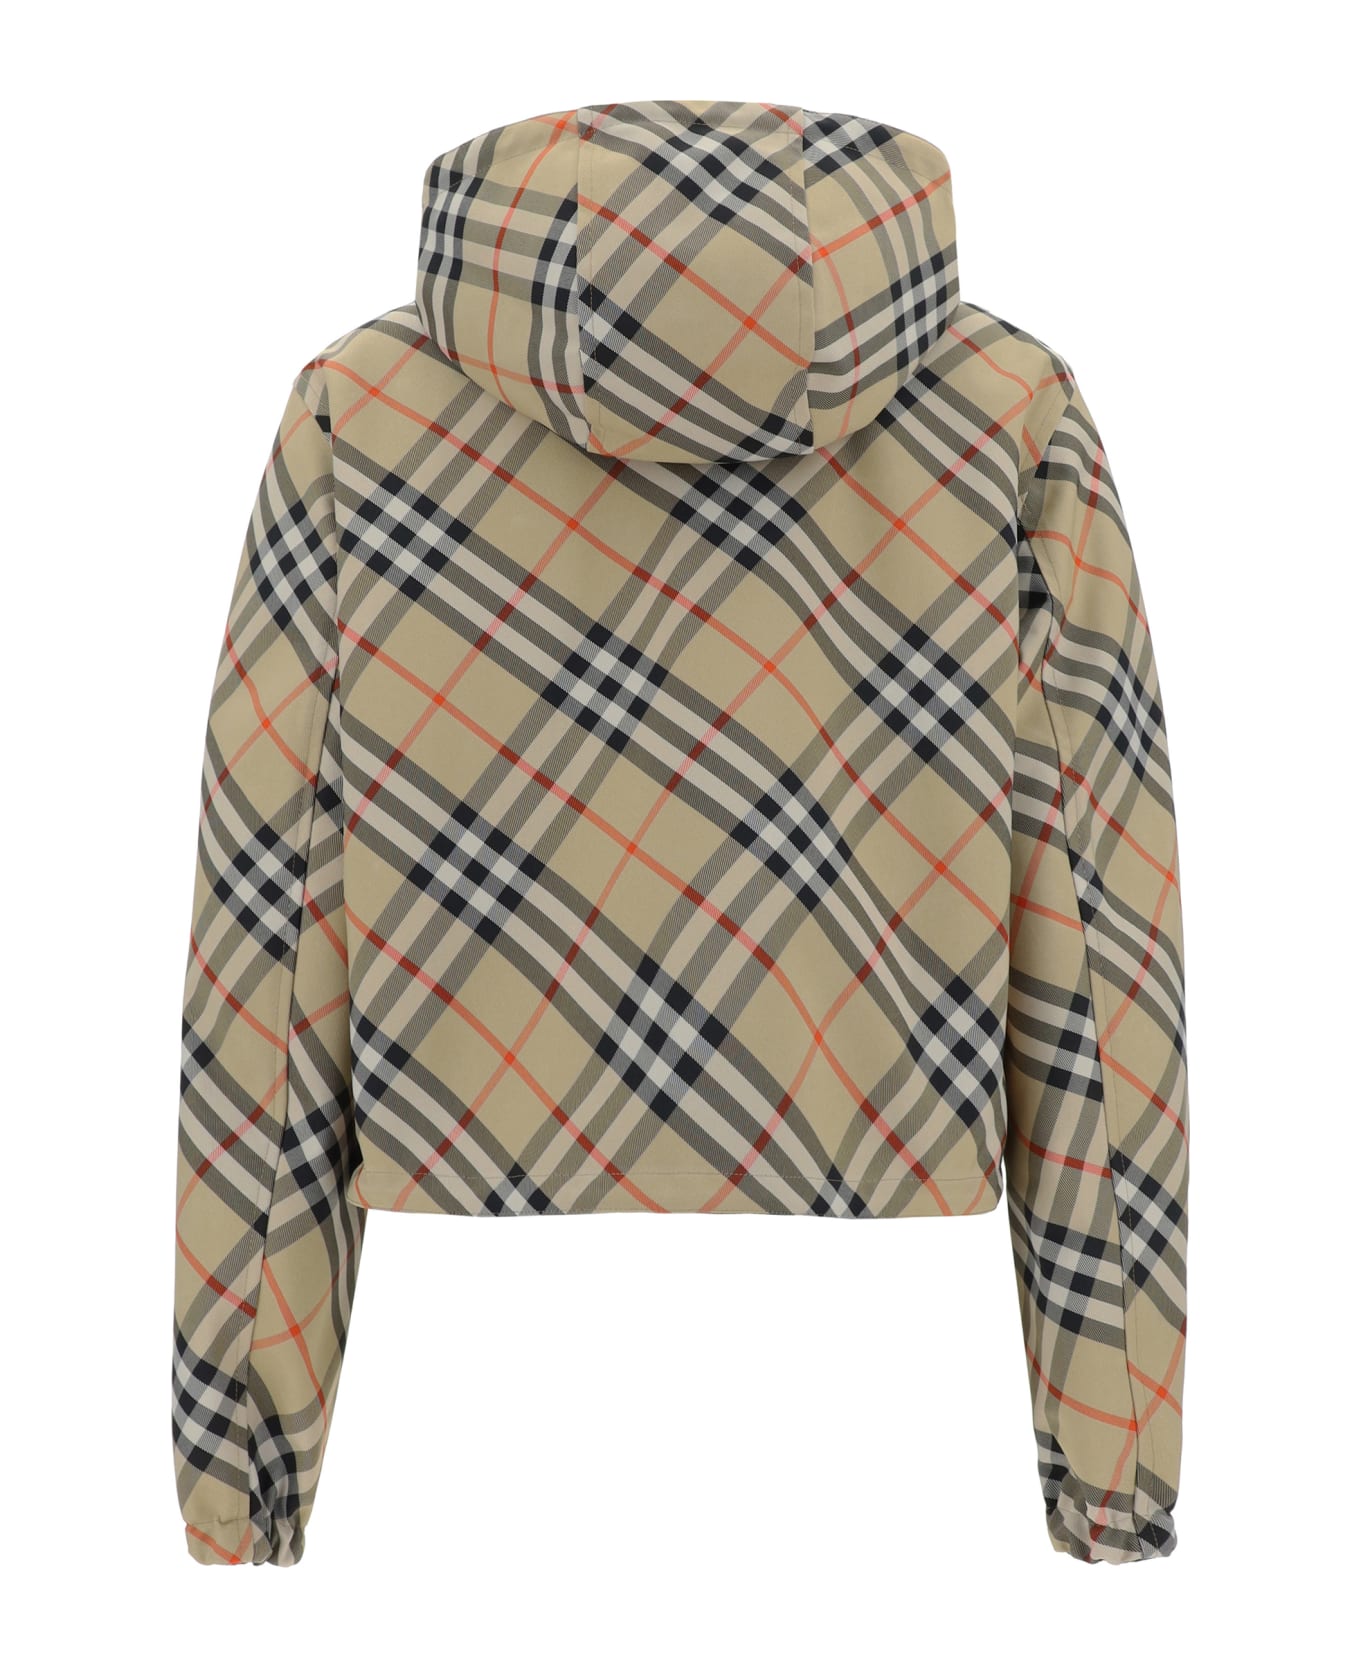 Burberry Reversible Hooded Jacket - Sand Ip Check